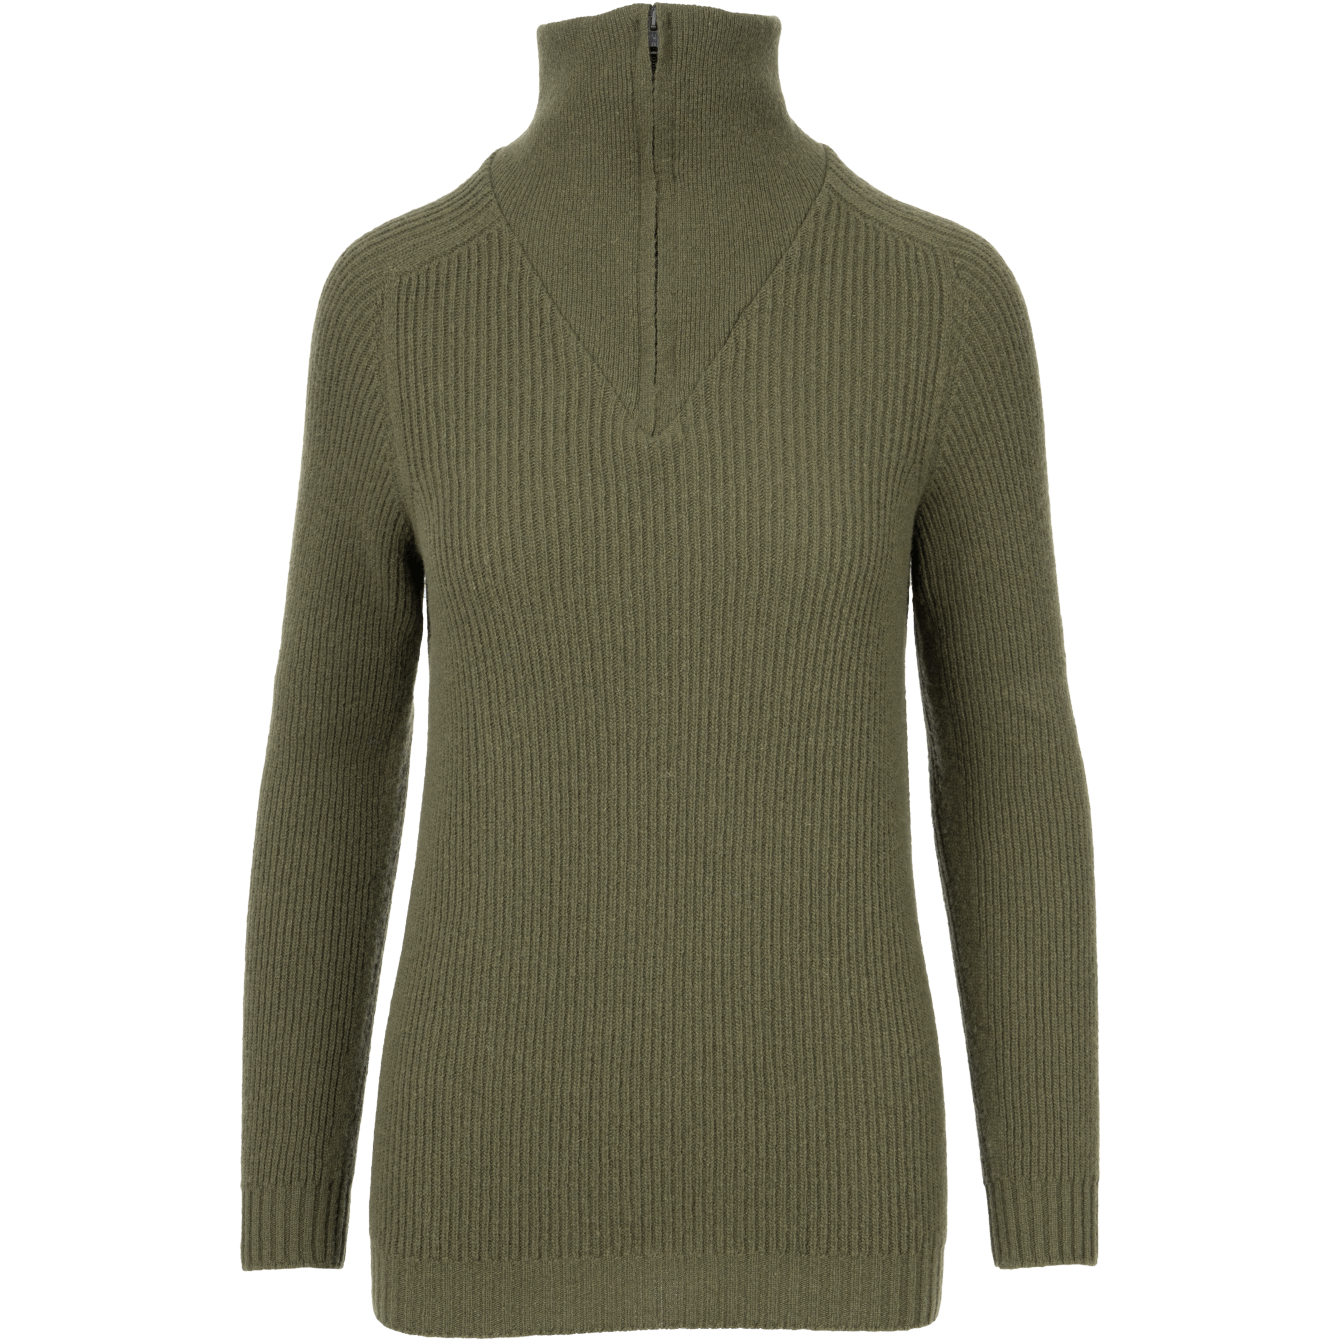 North Outdoor W's Metso Sweater - 100 % Merino Wool - Made in Finland Olive Green Shirt